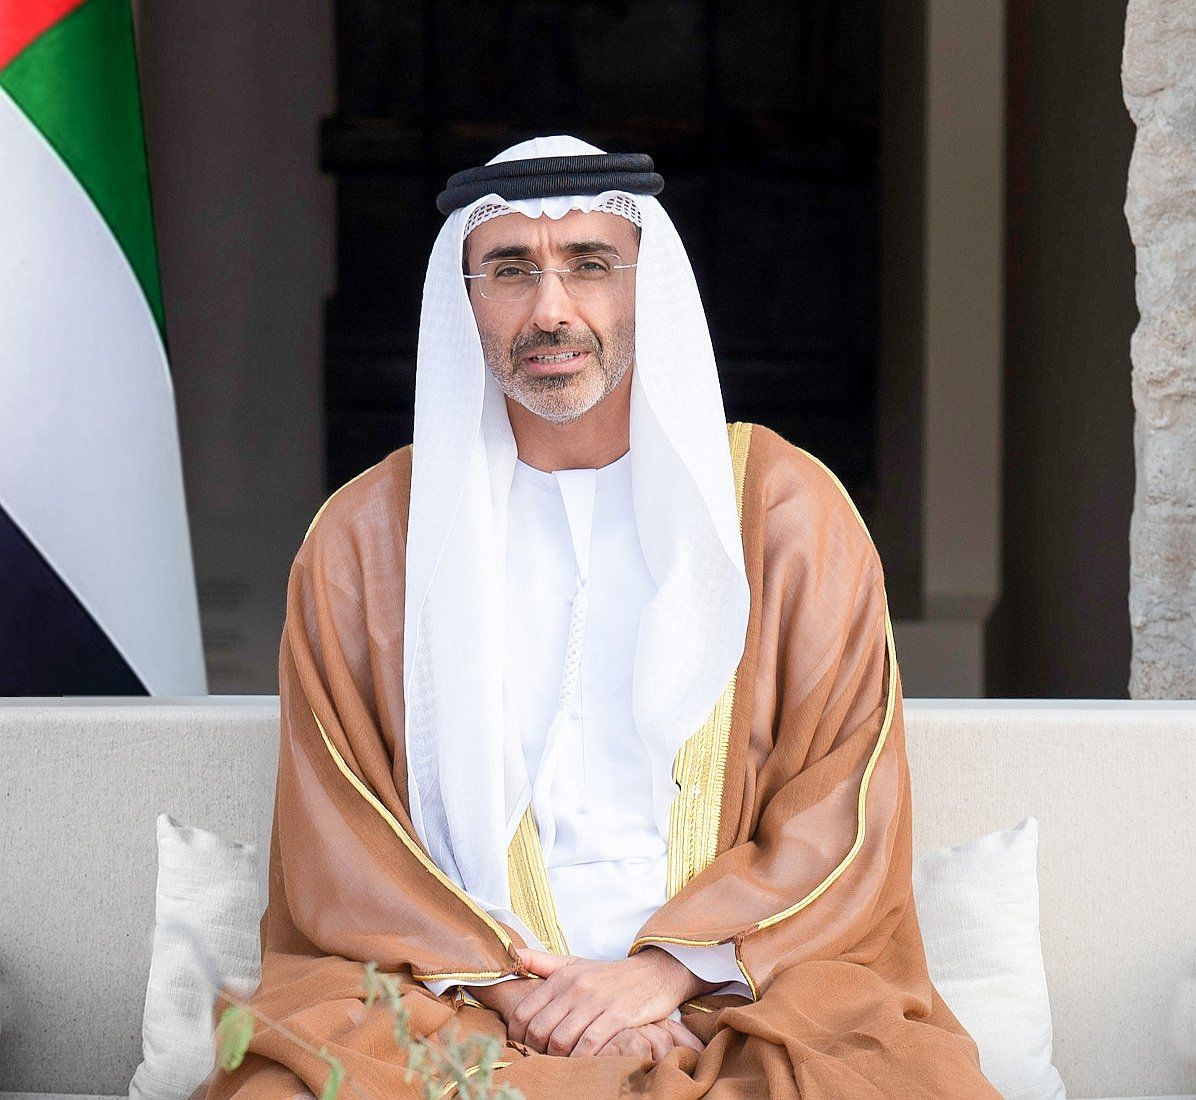 Theyab bin Zayed reconstitutes the boards of directors of Al Wahda Club and Company